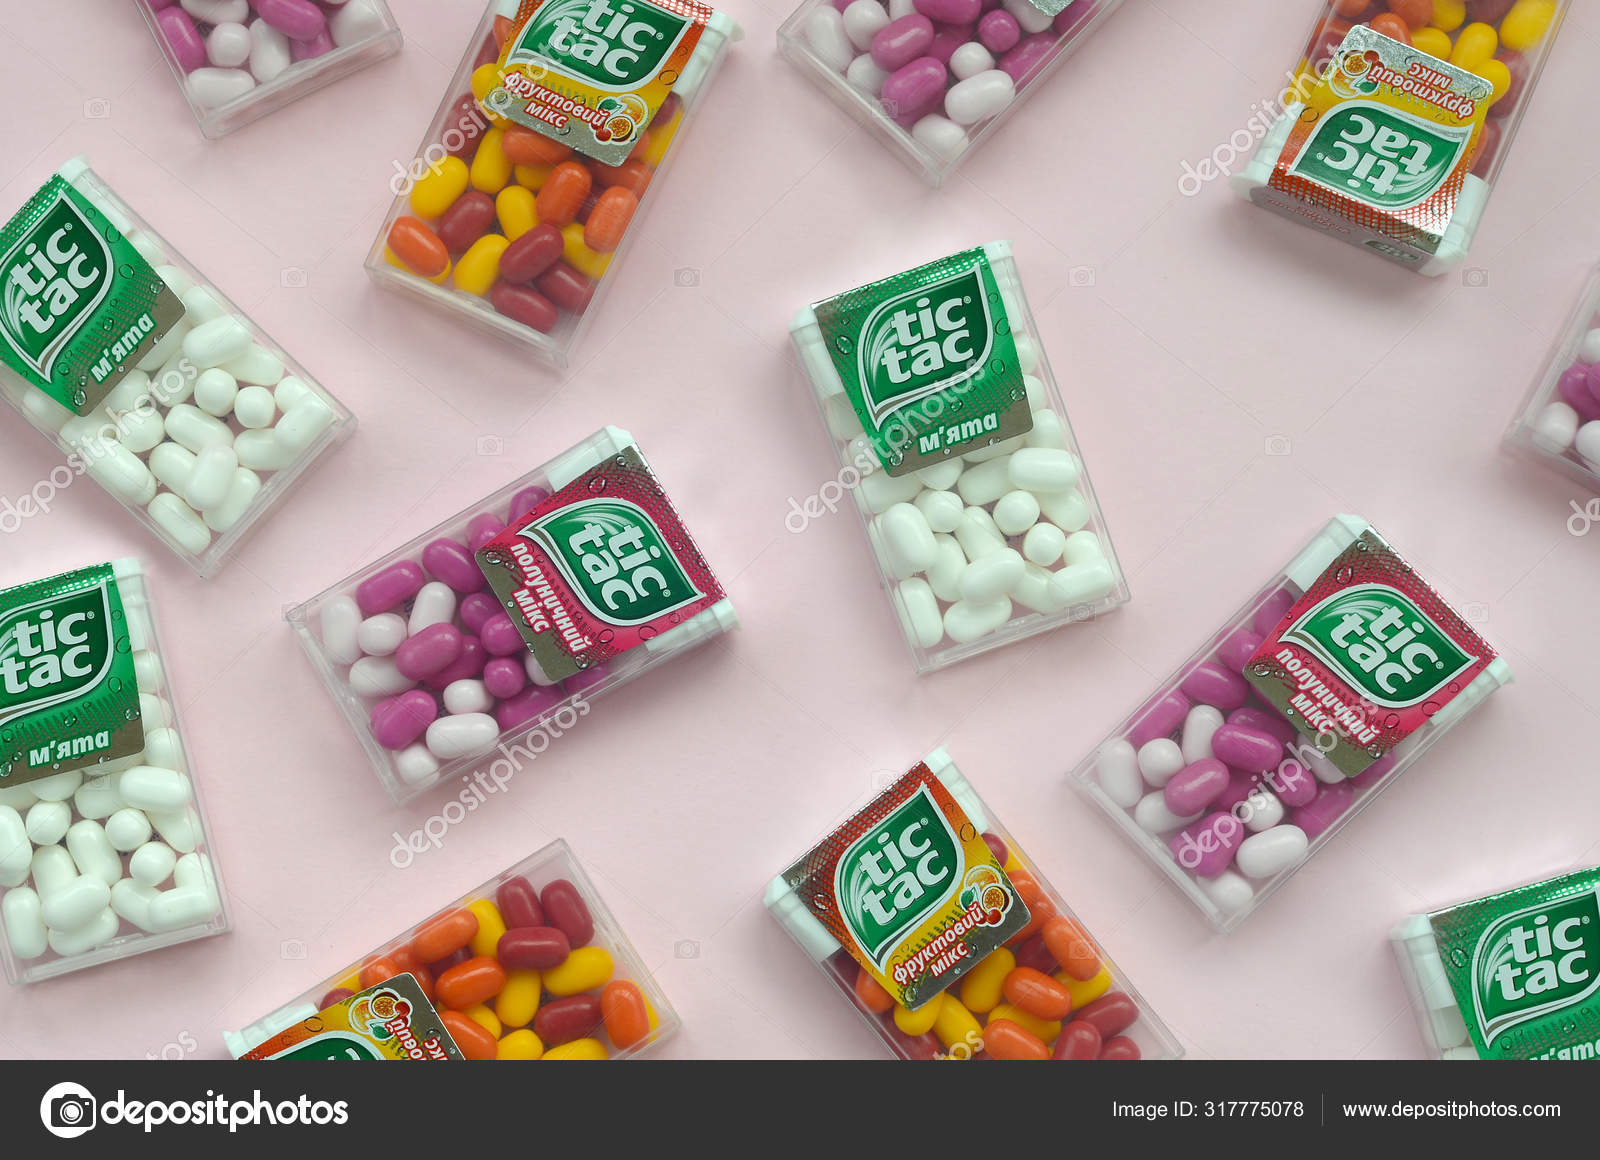 Many Tic Tac Candy Packages Tic Tac Is Popular Due Its Minty Fresh Taste And Easy To Carry Hard Mints Produced By Ferrero Since 1968 Stock Editorial Photo C Mehaniq